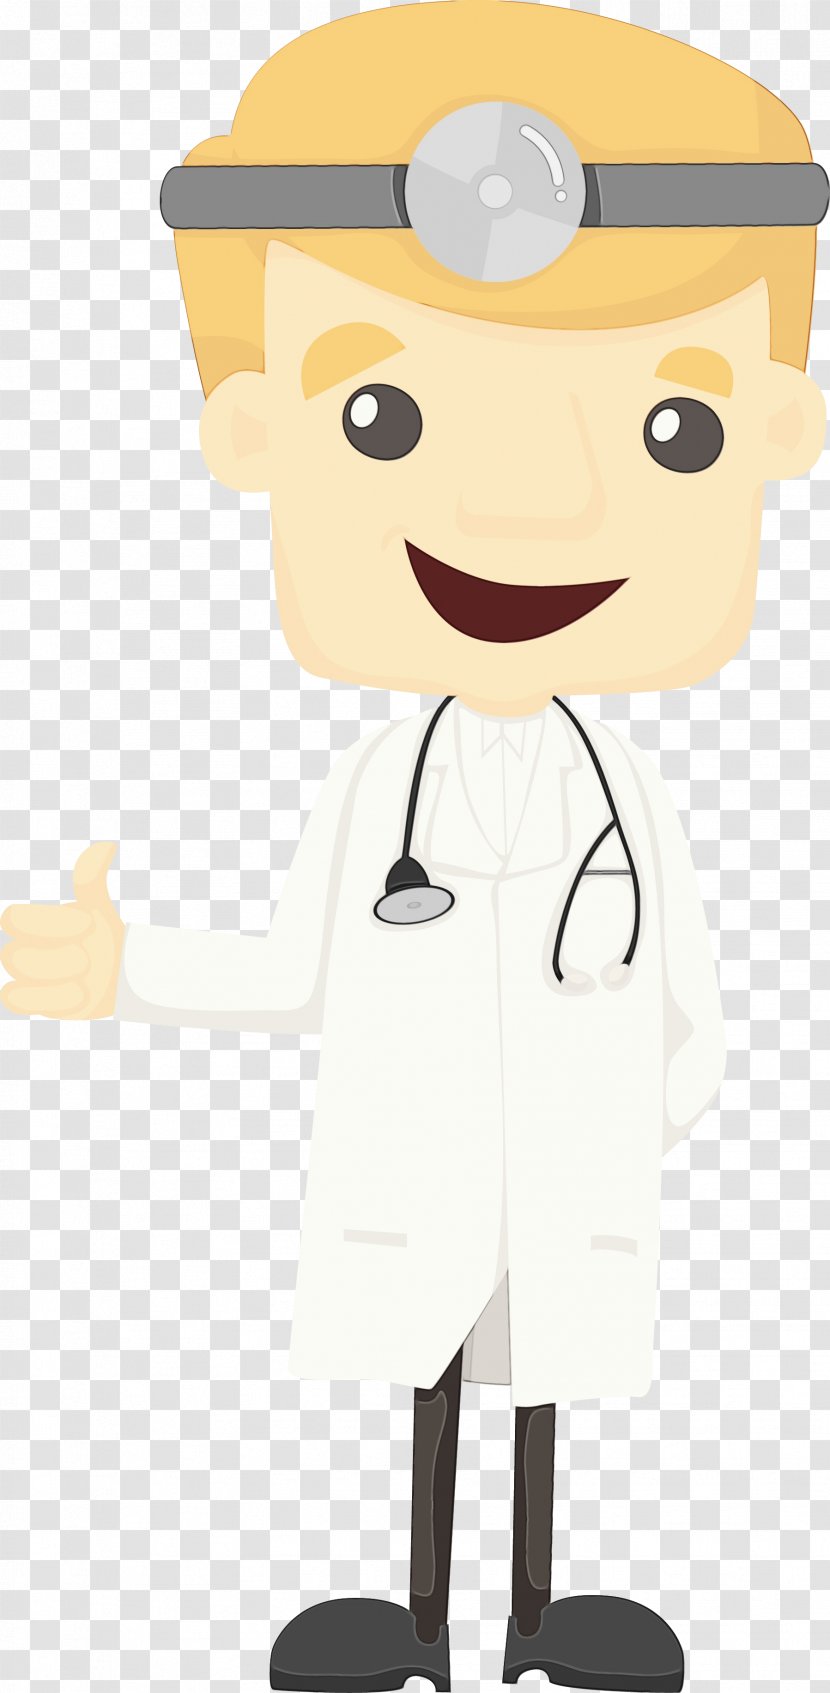 Stethoscope - Spamming - White Coat Smile Transparent PNG